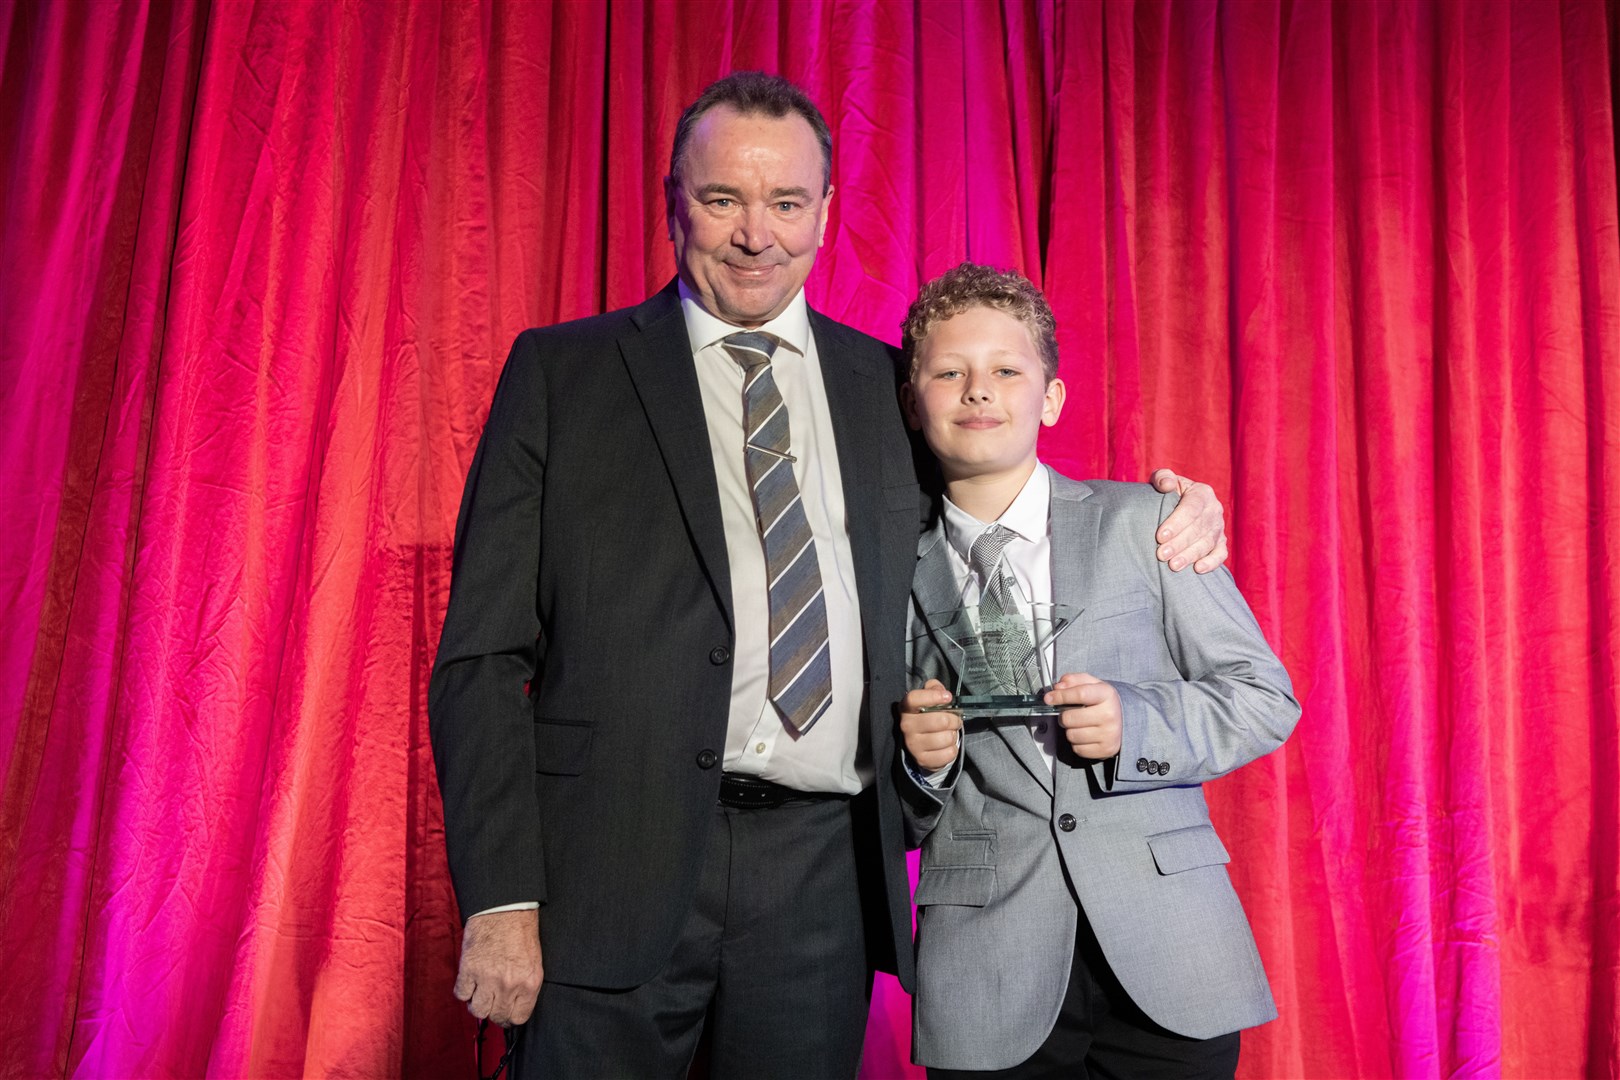 Jack Walker was awarded Primary Pupil of the Year presented by Andrew Smith, Owner and Director of Andrew Smith Funeral Directors. Picture: Beth Taylor